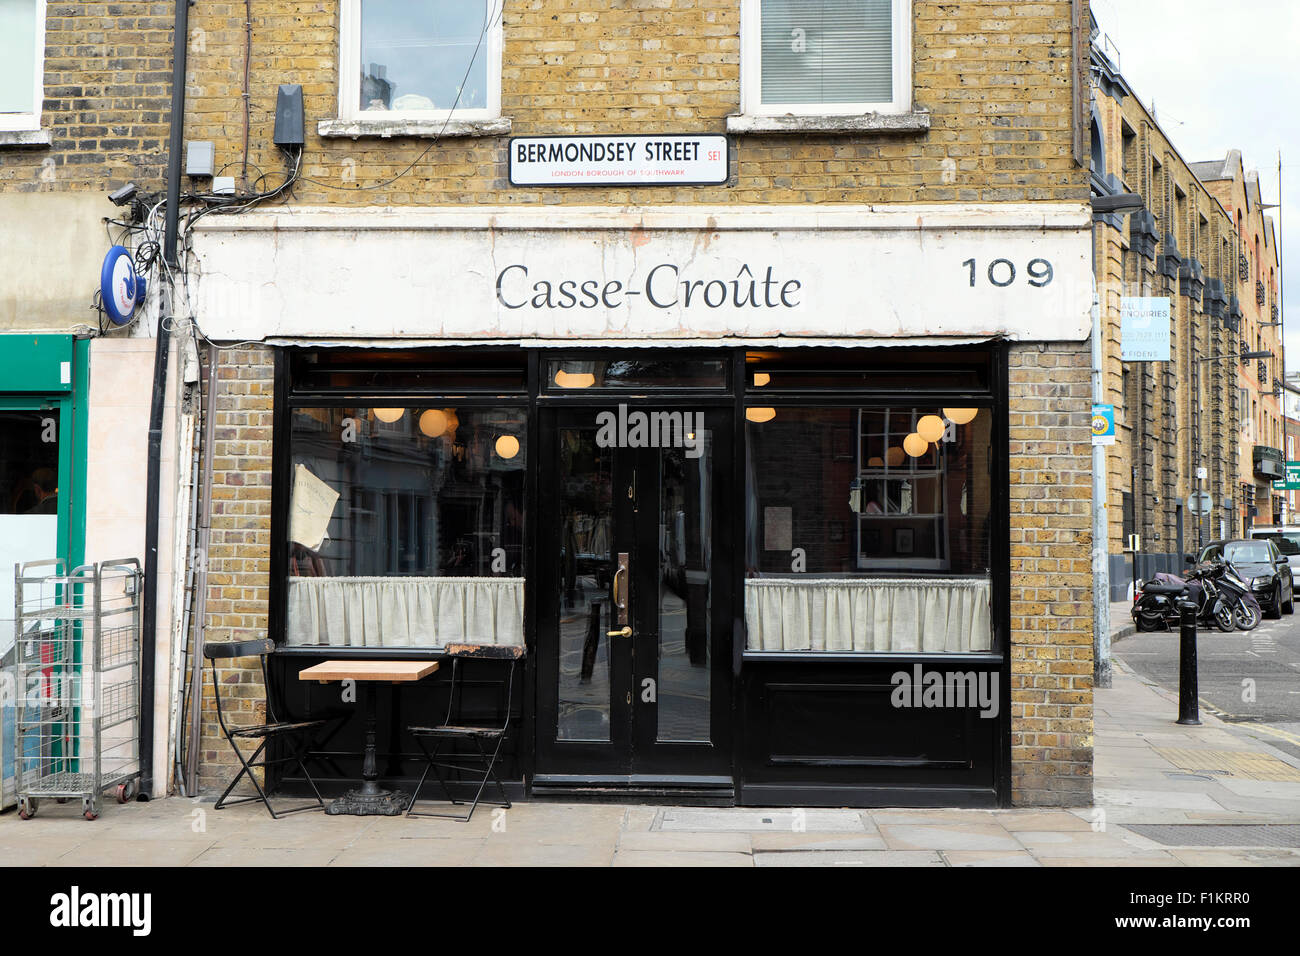 Casse-Croute exterior and Bermondsey Street sign in Southwark, South London UK  KATHY DEWITT Stock Photo